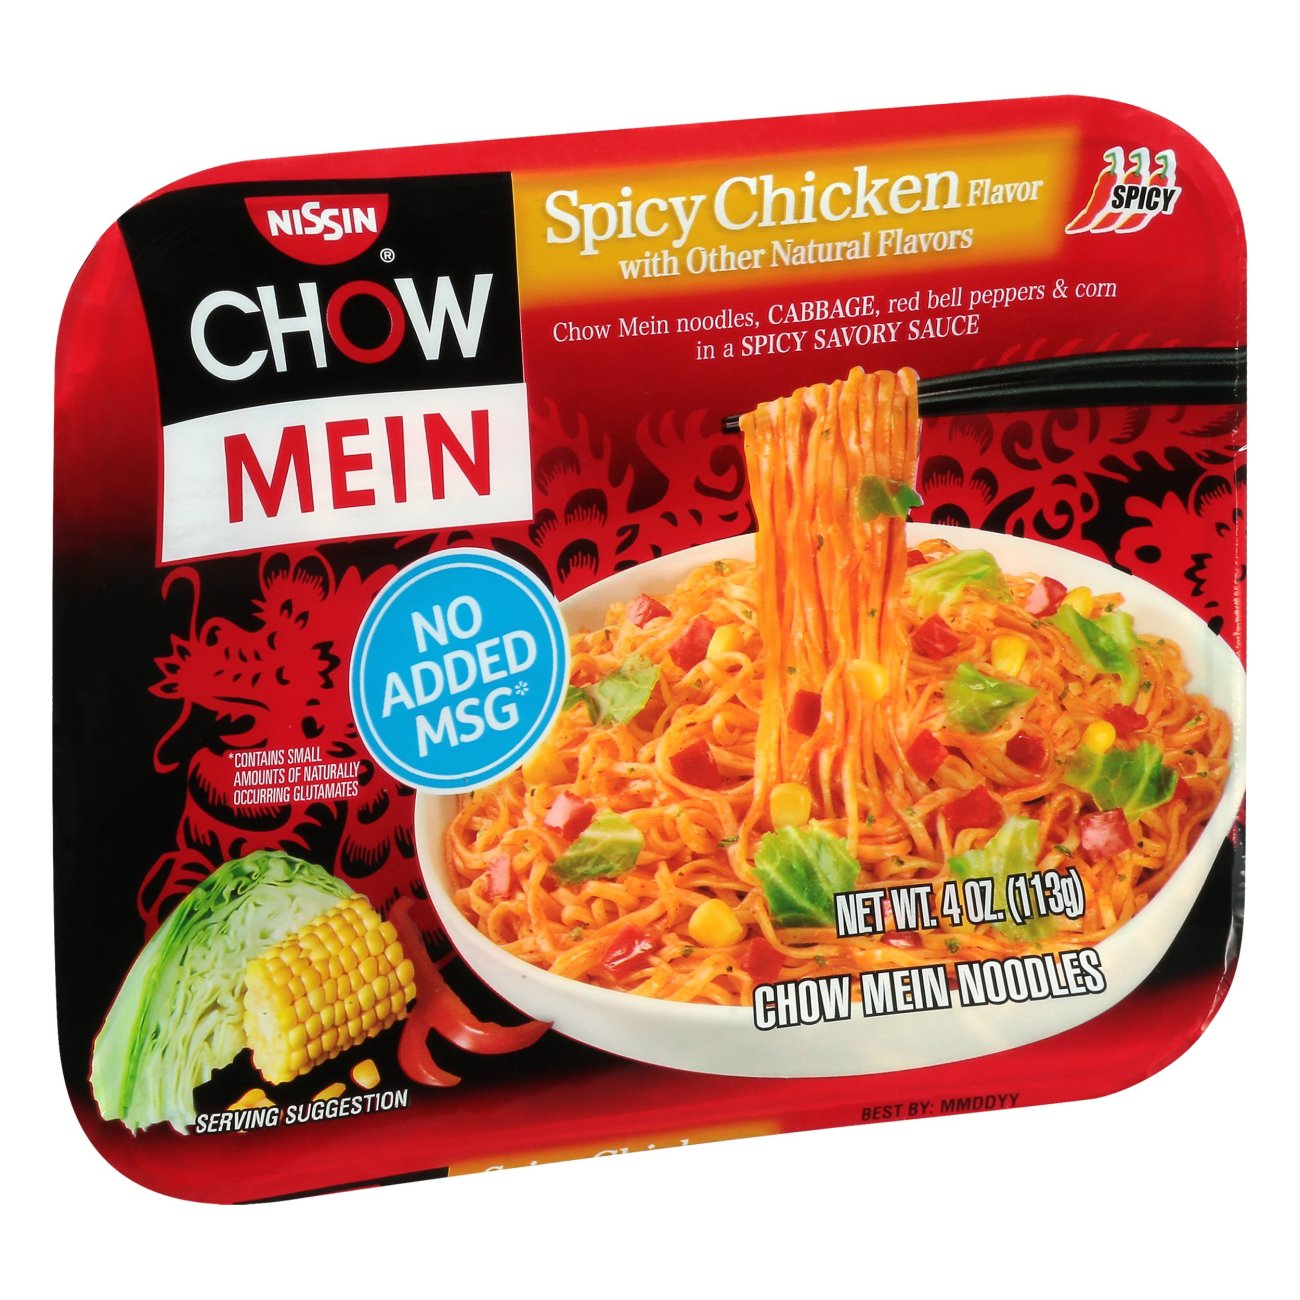 Nissin Chow Mein Spicy Chicken Flavor Noodles Shop Pantry Meals At H E B